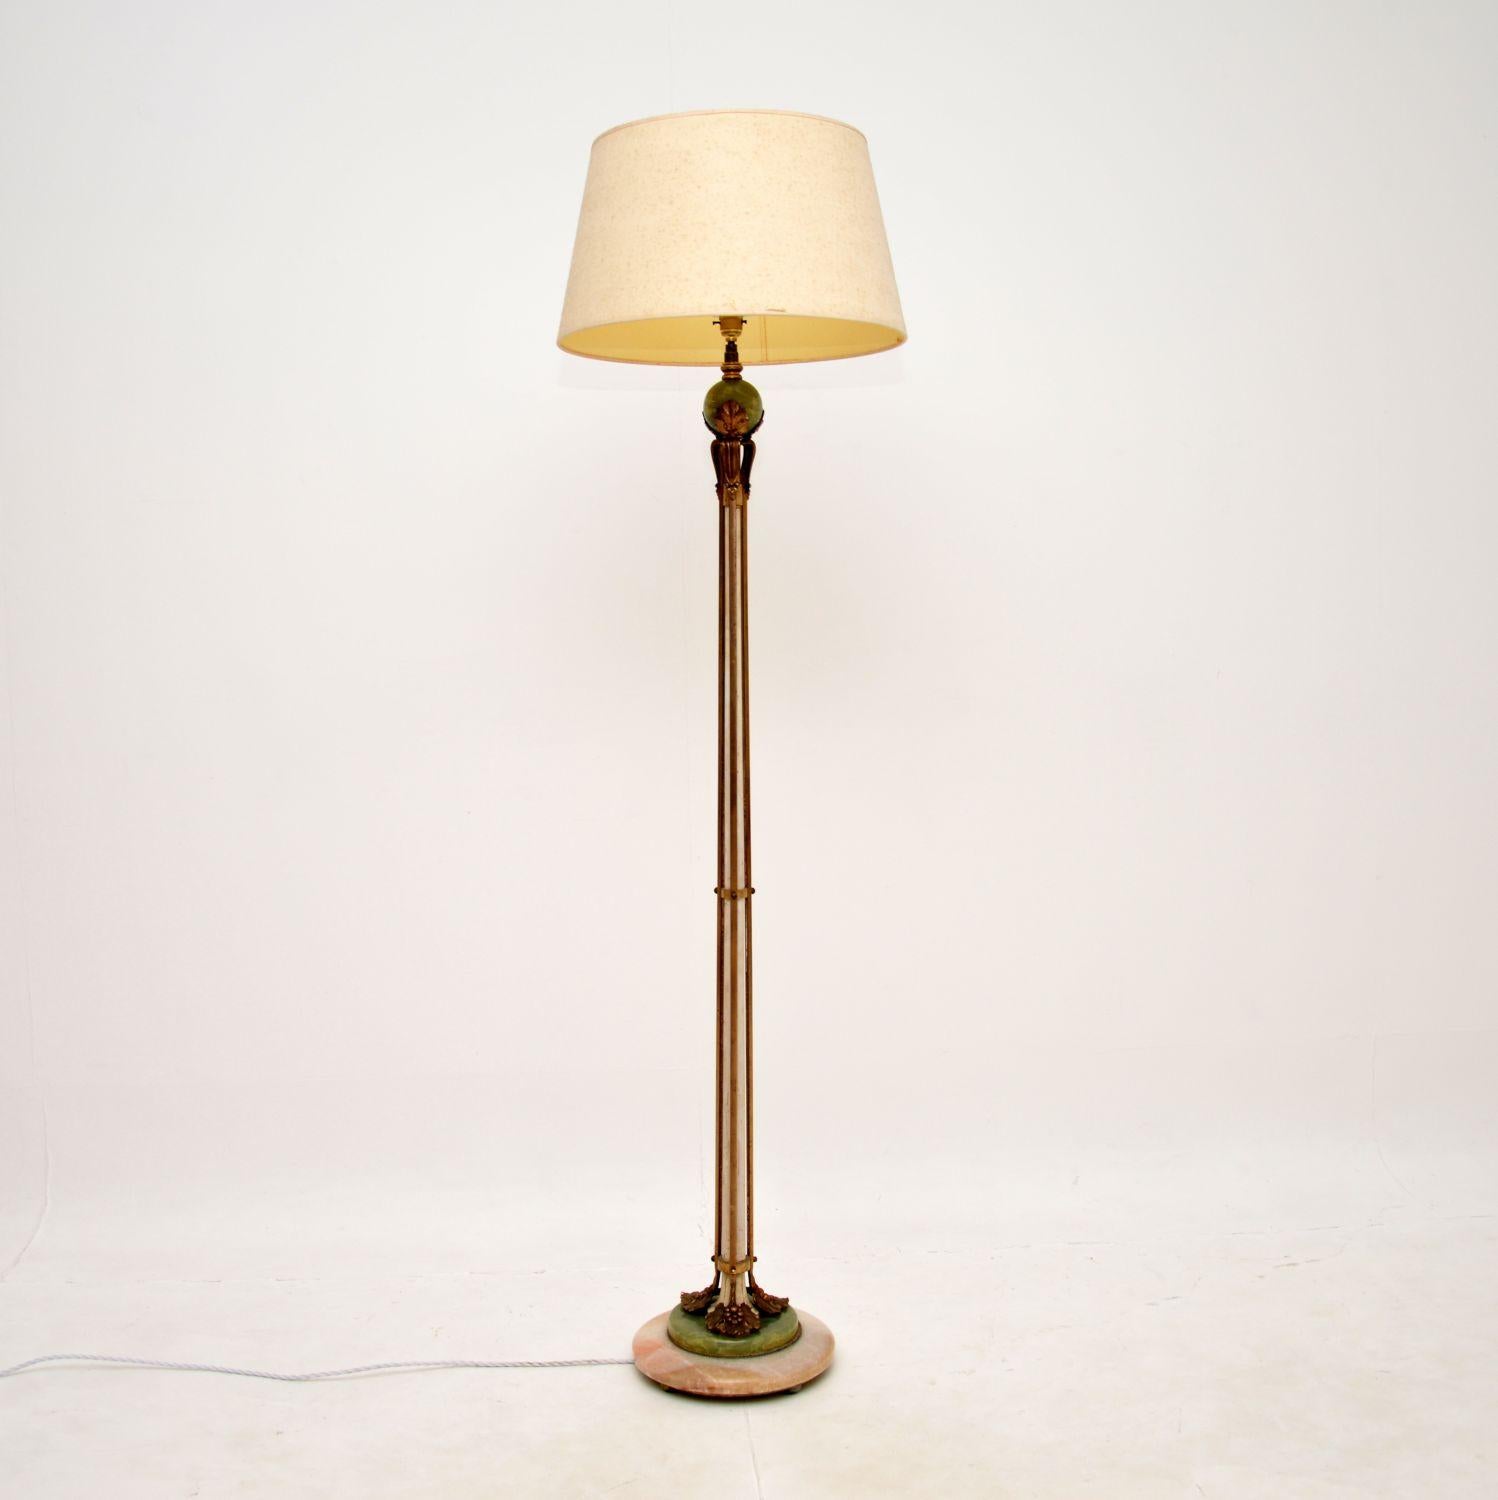 A stunning antique French onyx and gilt metal floor lamp. This was made in France, it dates from around the 1920’s.

The quality is outstanding, this has a base made from two different types of onyx, there is also a lovely spherical onyx support